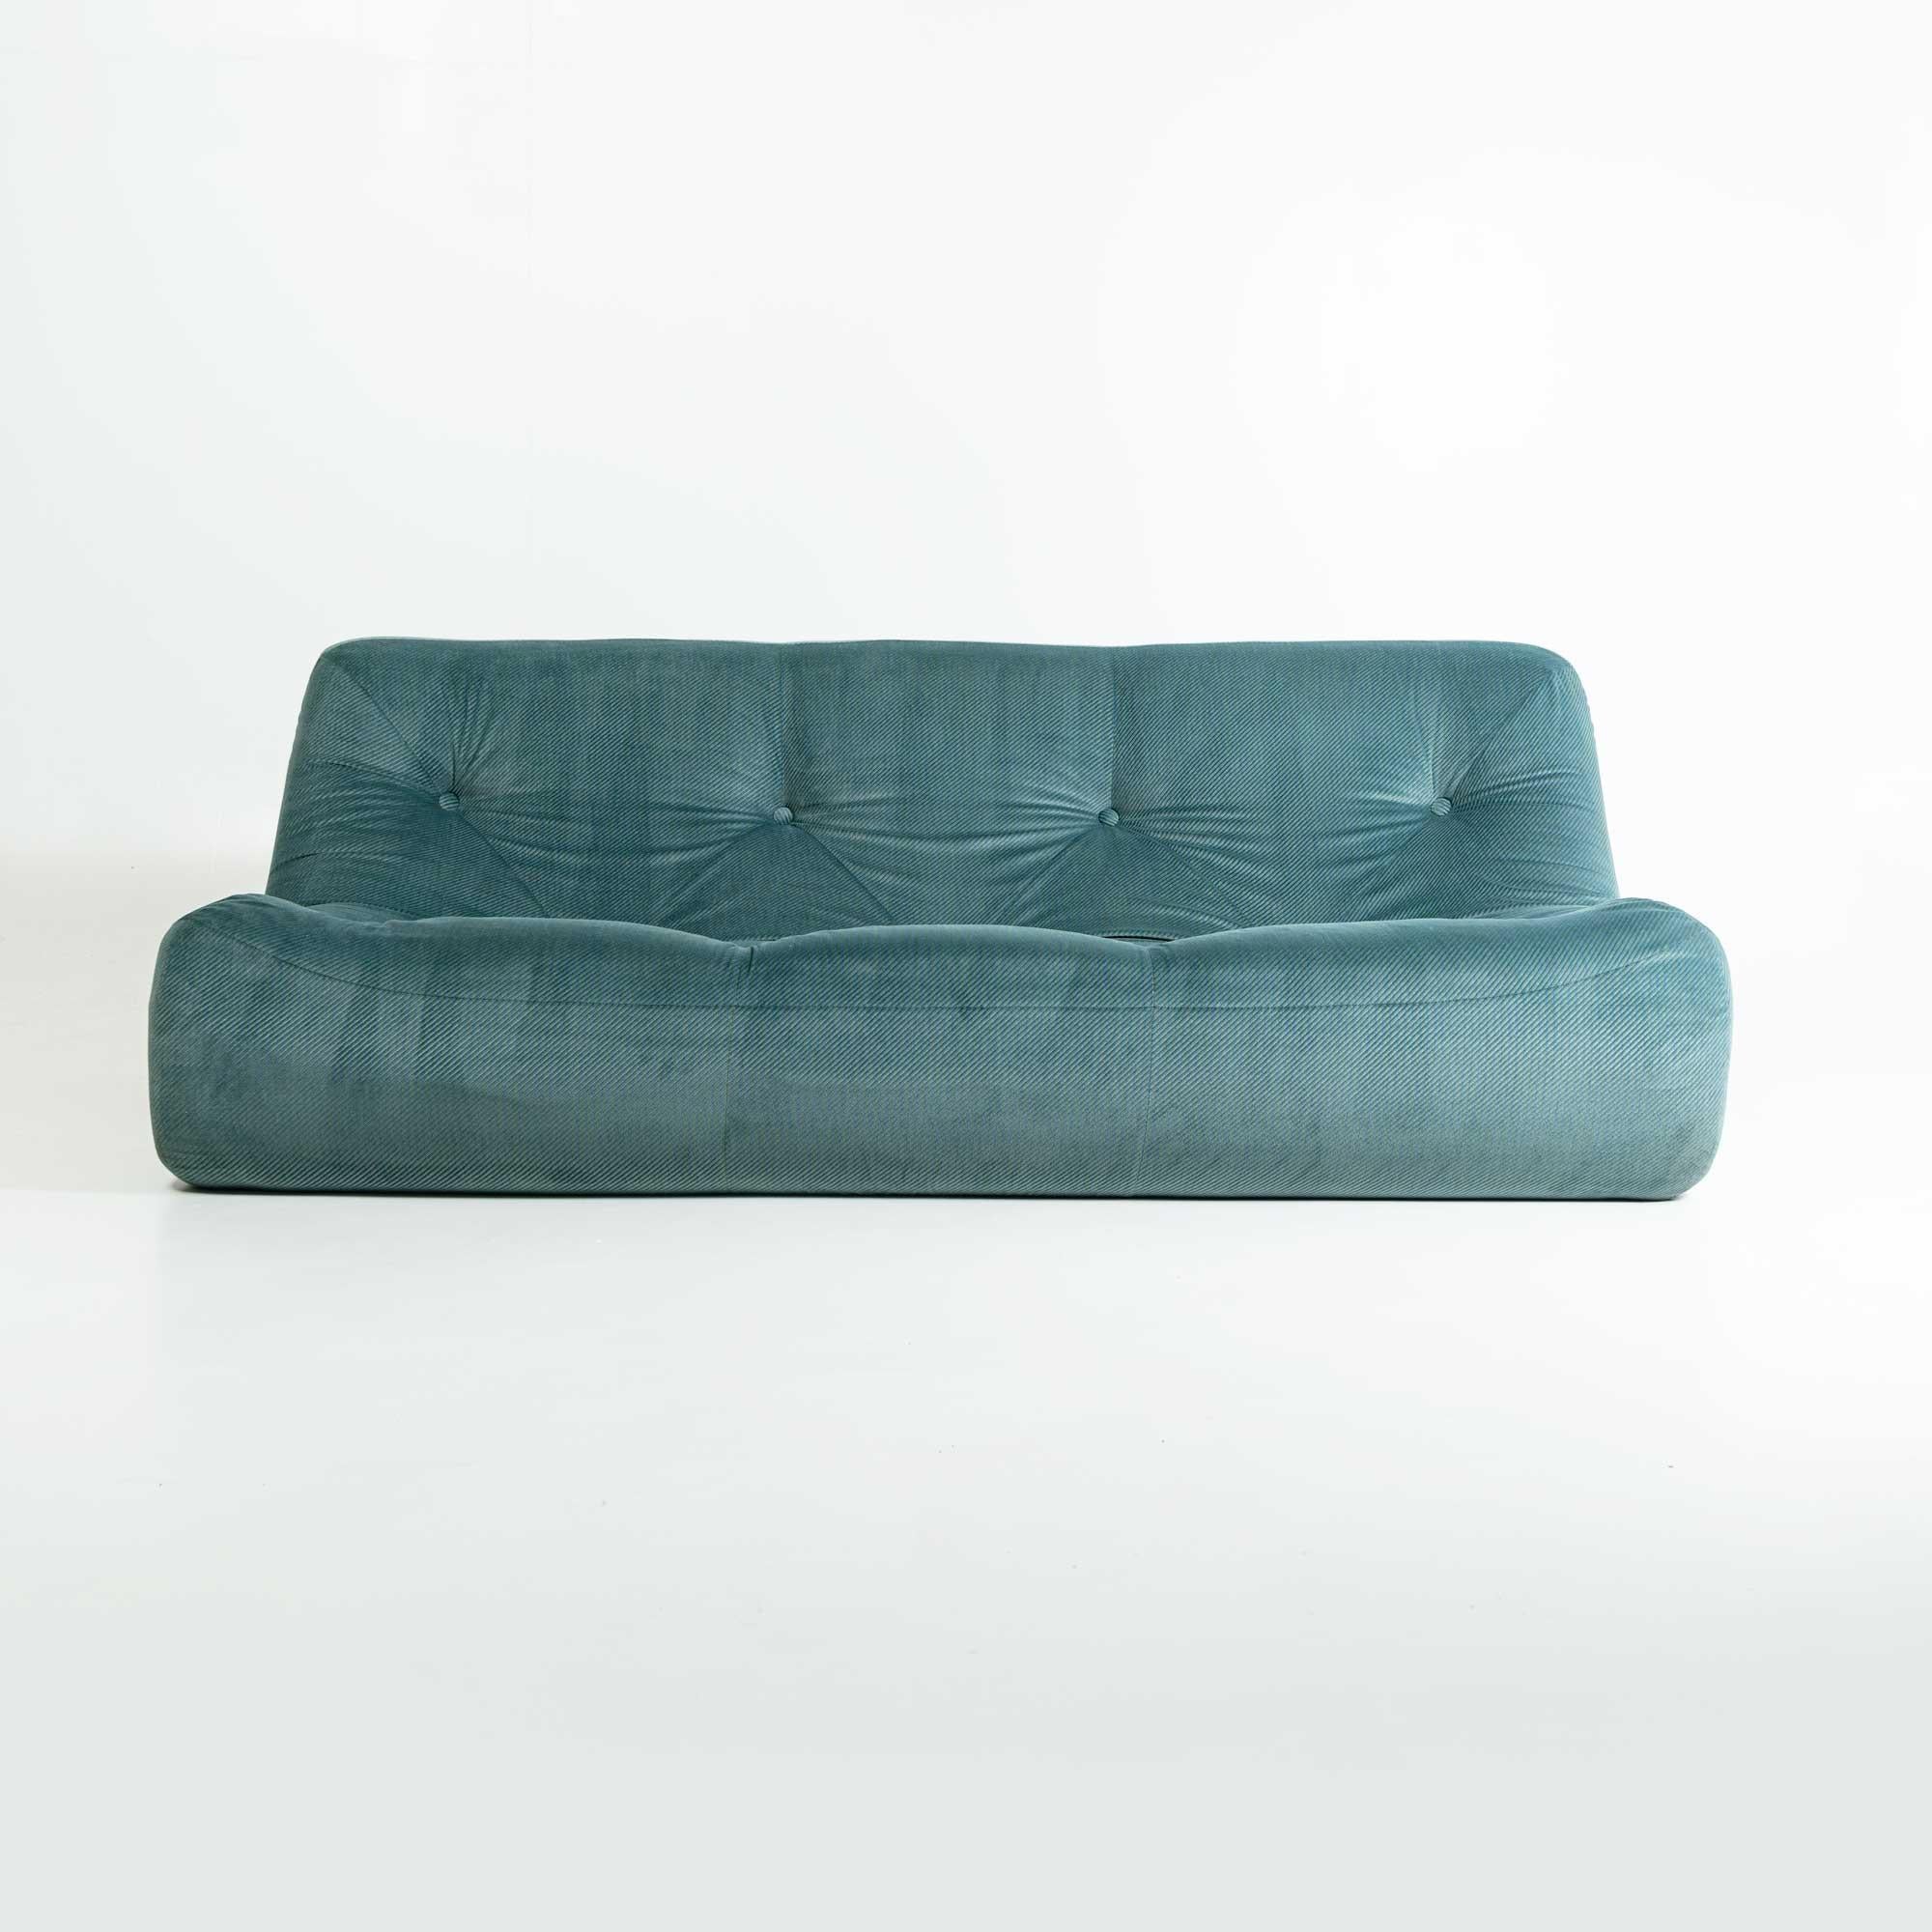 This is the Kali three seater sofa designed by Michel Ducaroy for Ligne Roset, France, upholstered in original Emerald Corduroy with blue stitching. A very unique fabric, soft and in good condition. Ready to be used.

The 'Kali' sofa by Michel